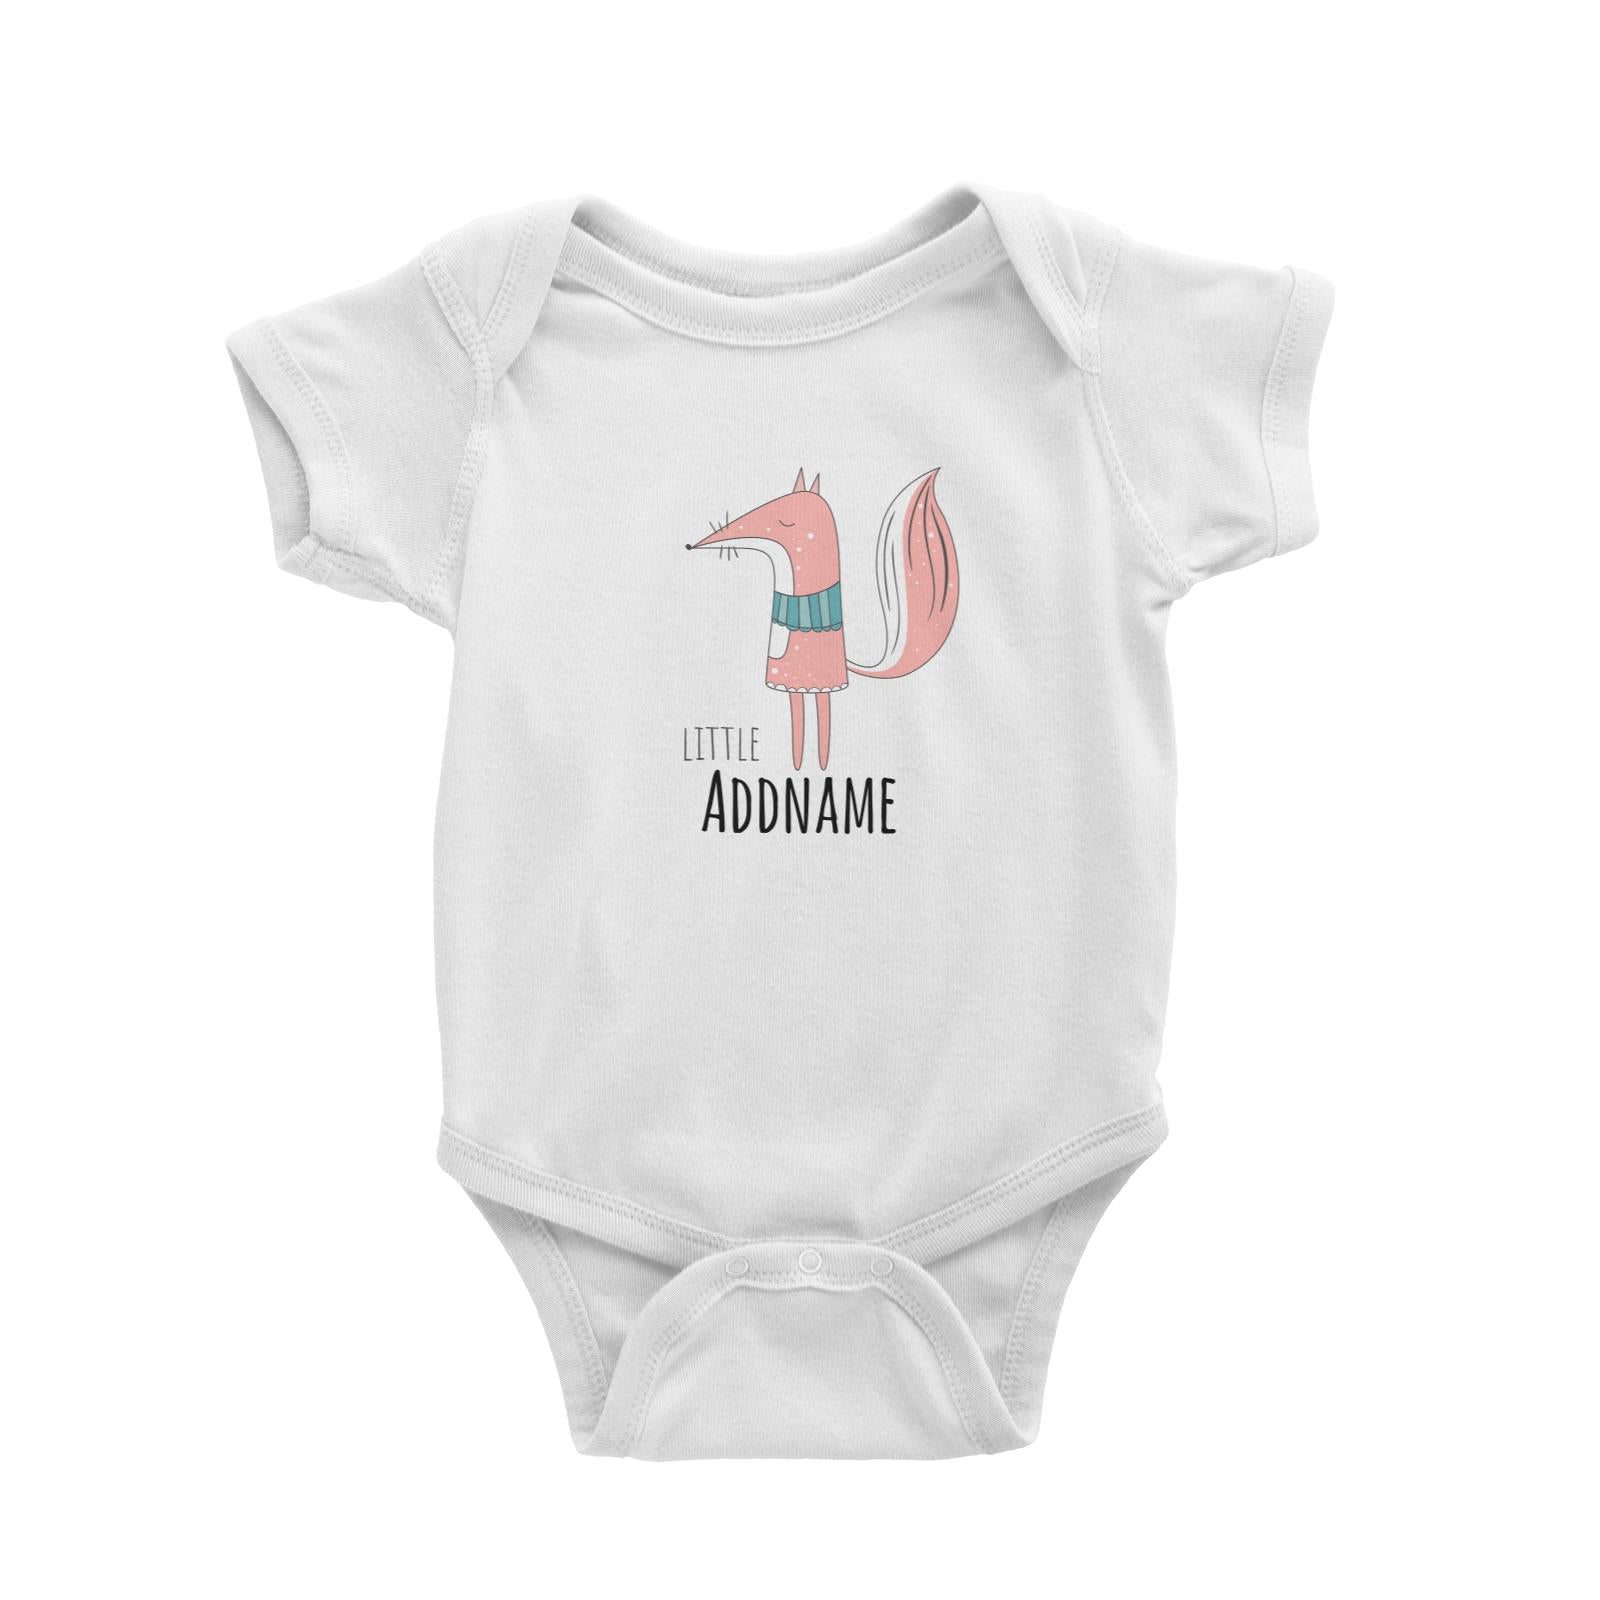 Drawn Adorable Animals Fox Little Addname Baby Romper